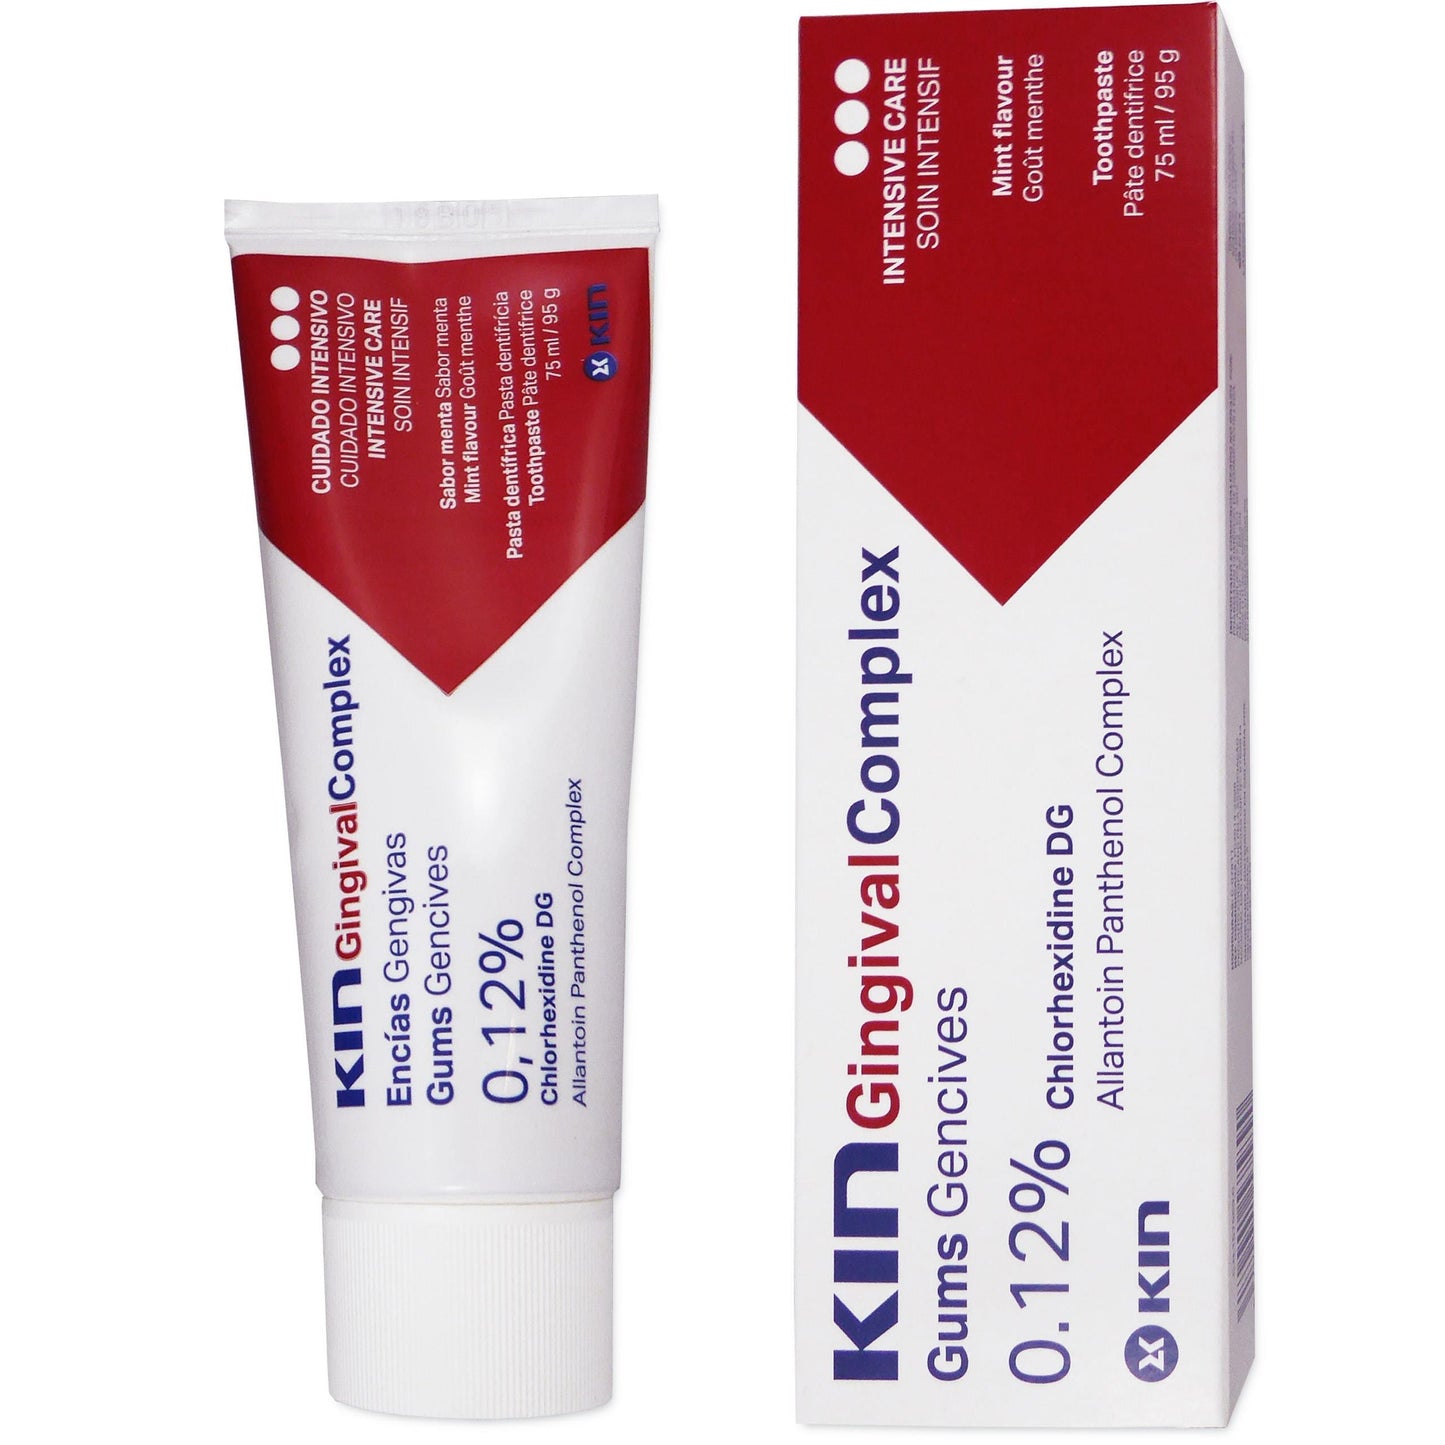 KIN Gingival Complex Toothpaste